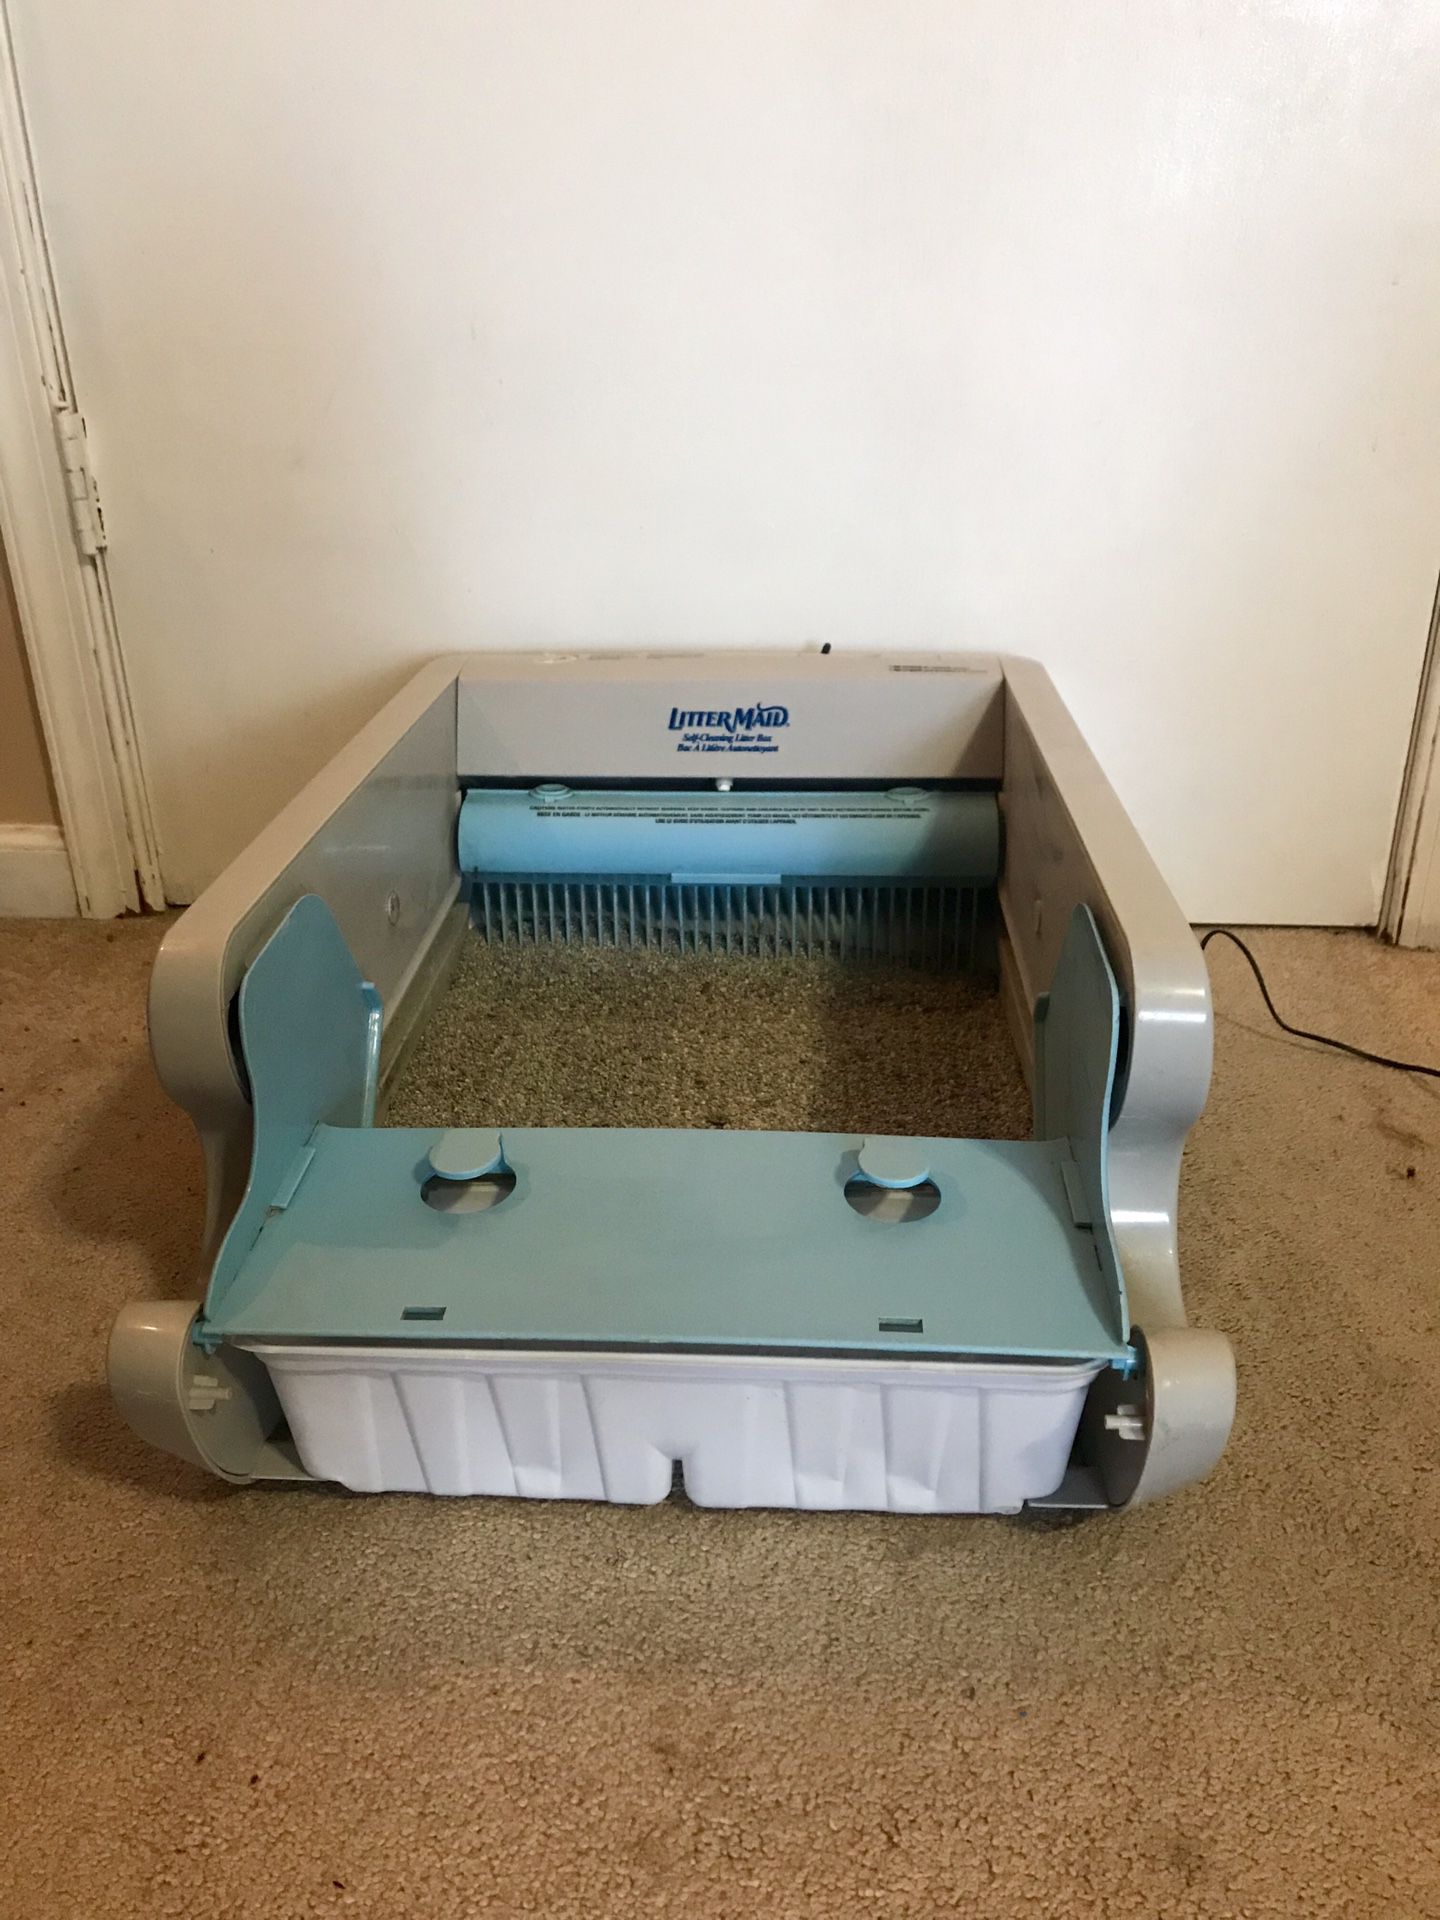 Automatic Self-Cleaning Litter Box